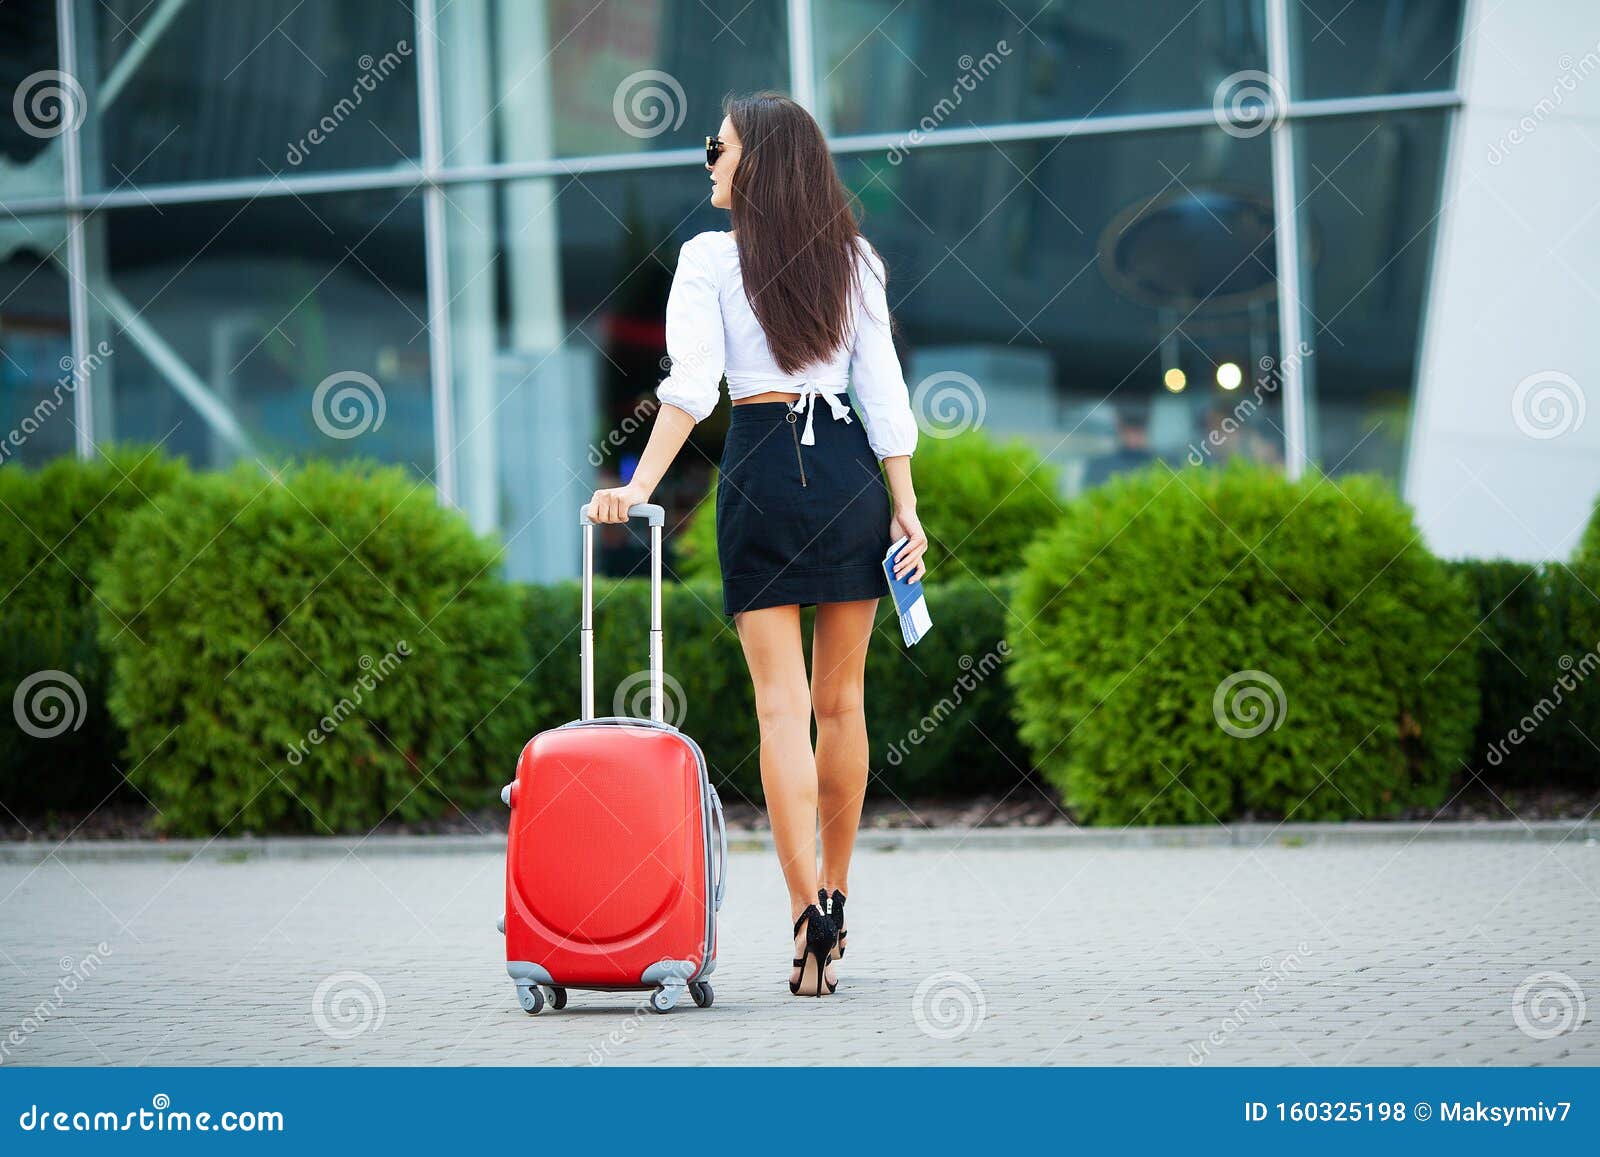 vacation. smiling female passenger proceeding to exit gate pulling suitcase through airport concourse